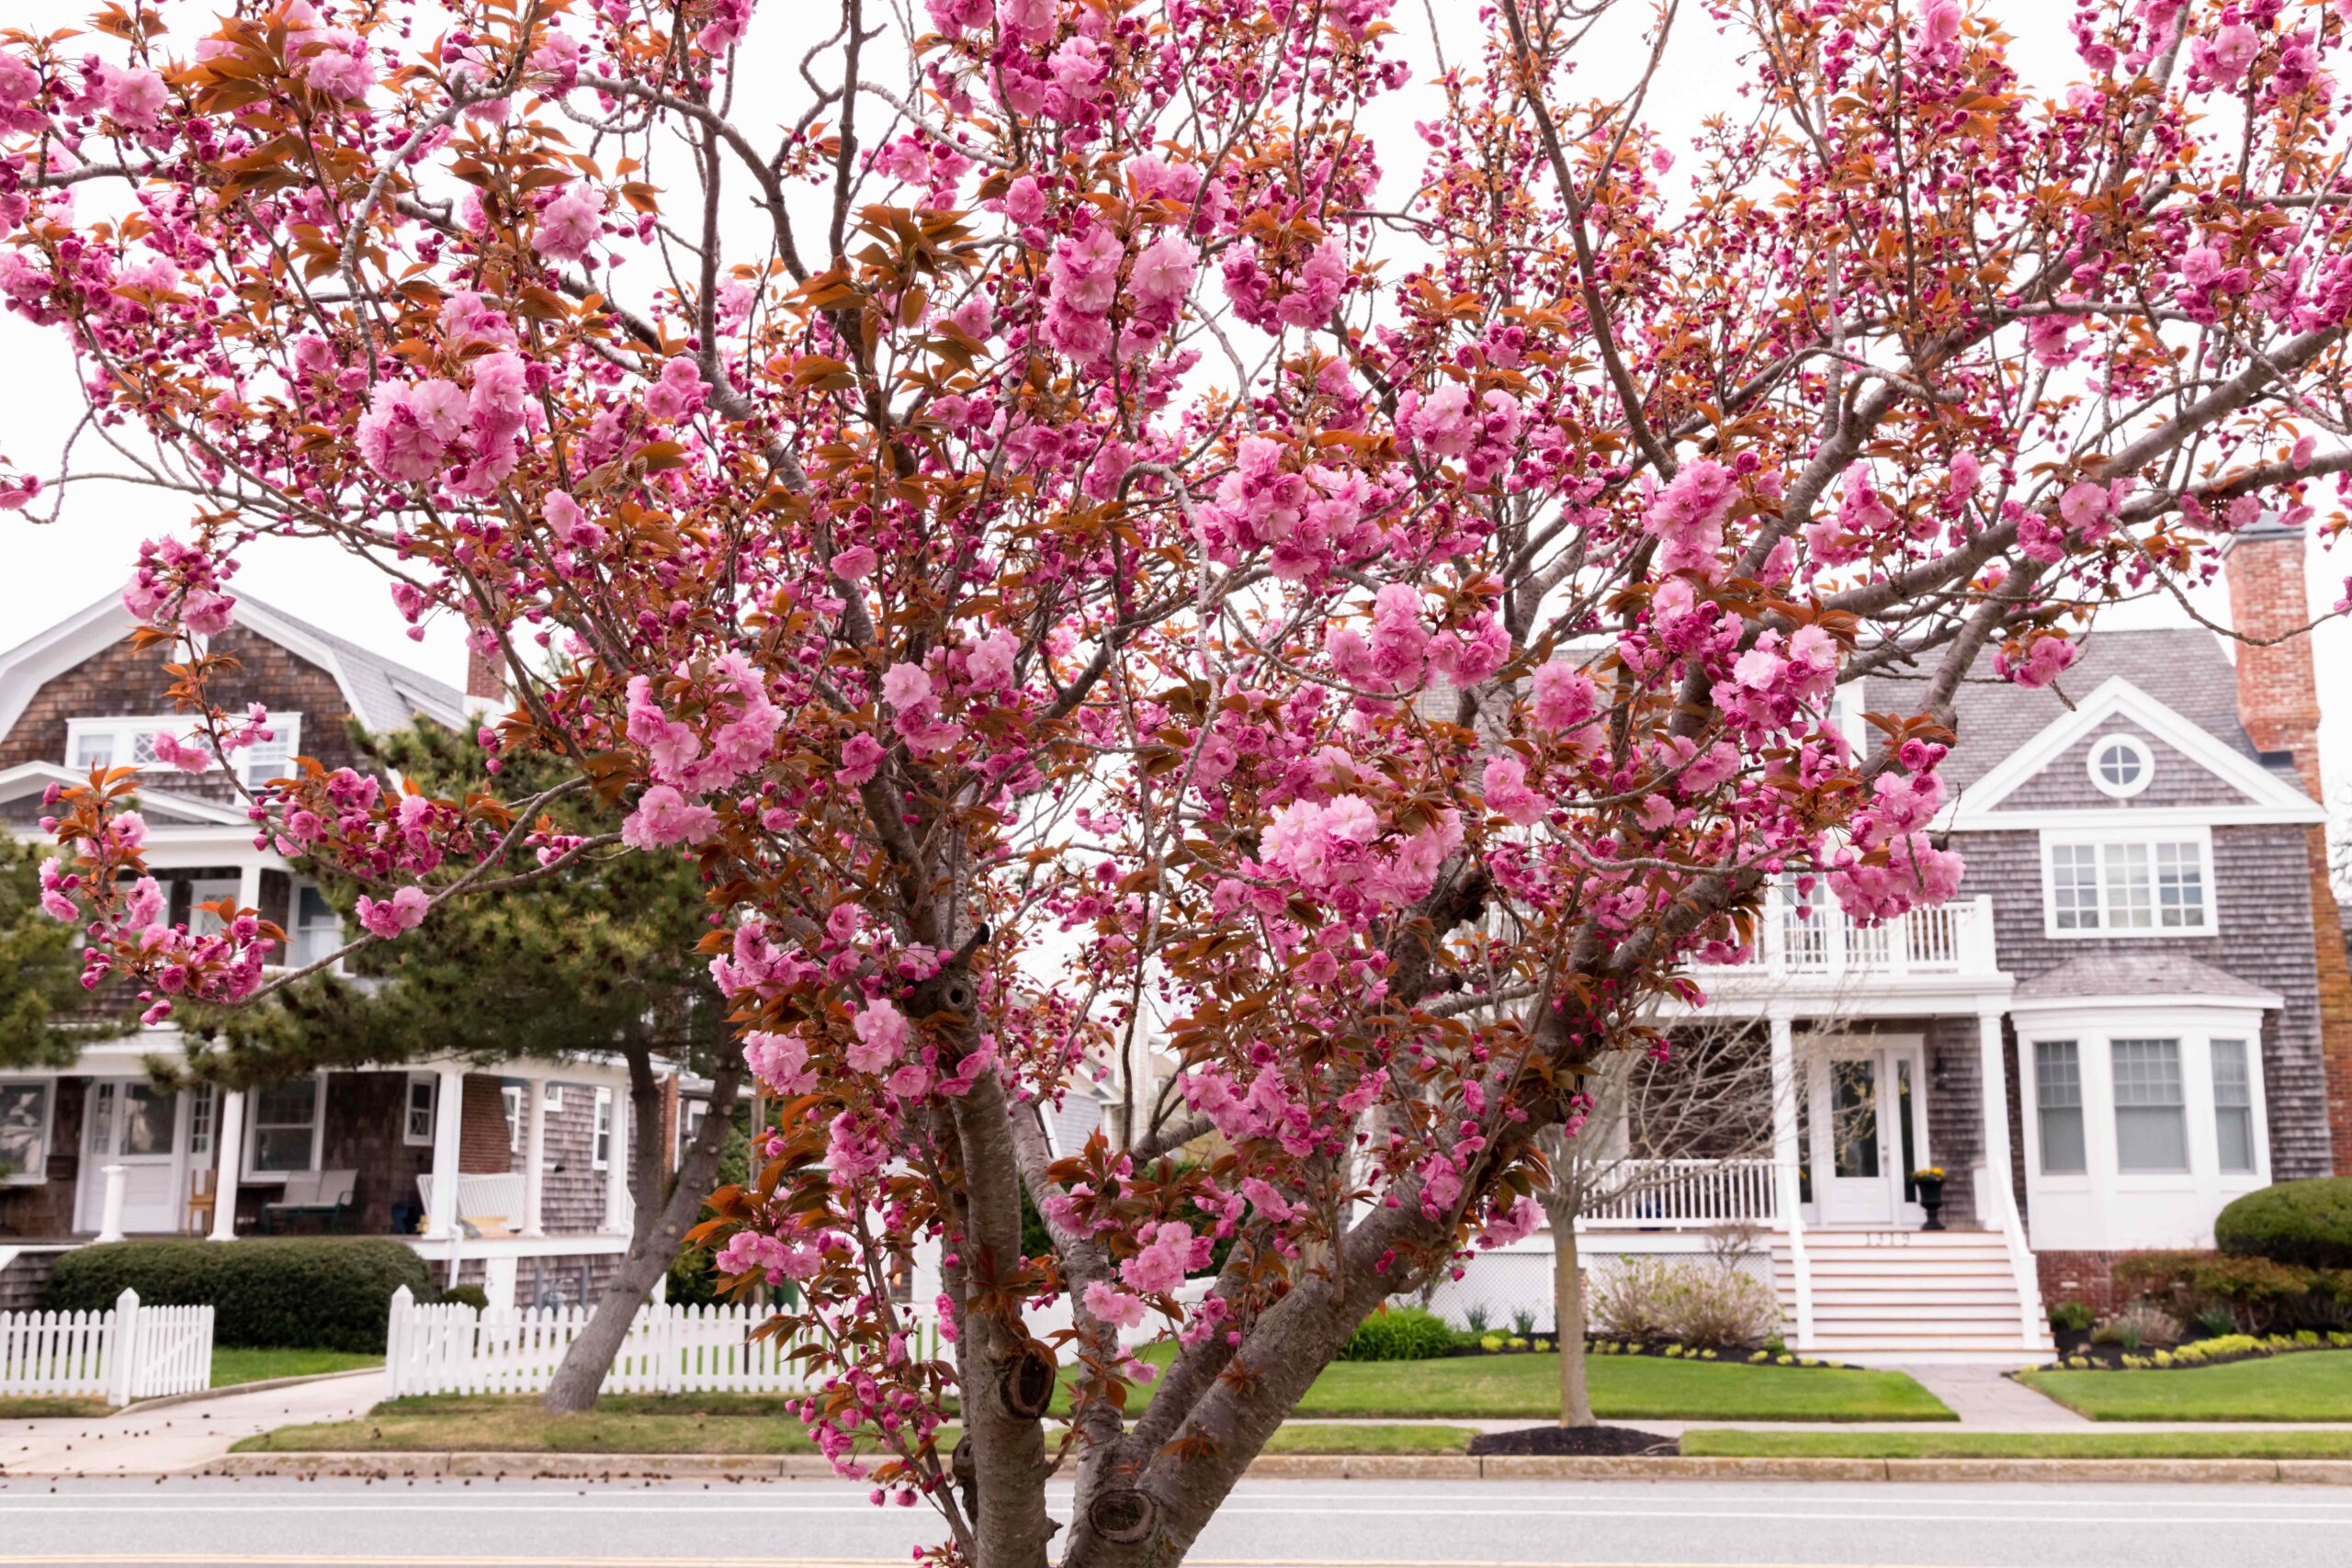 Pink flowers on a tree with two cedar shake houses in the background